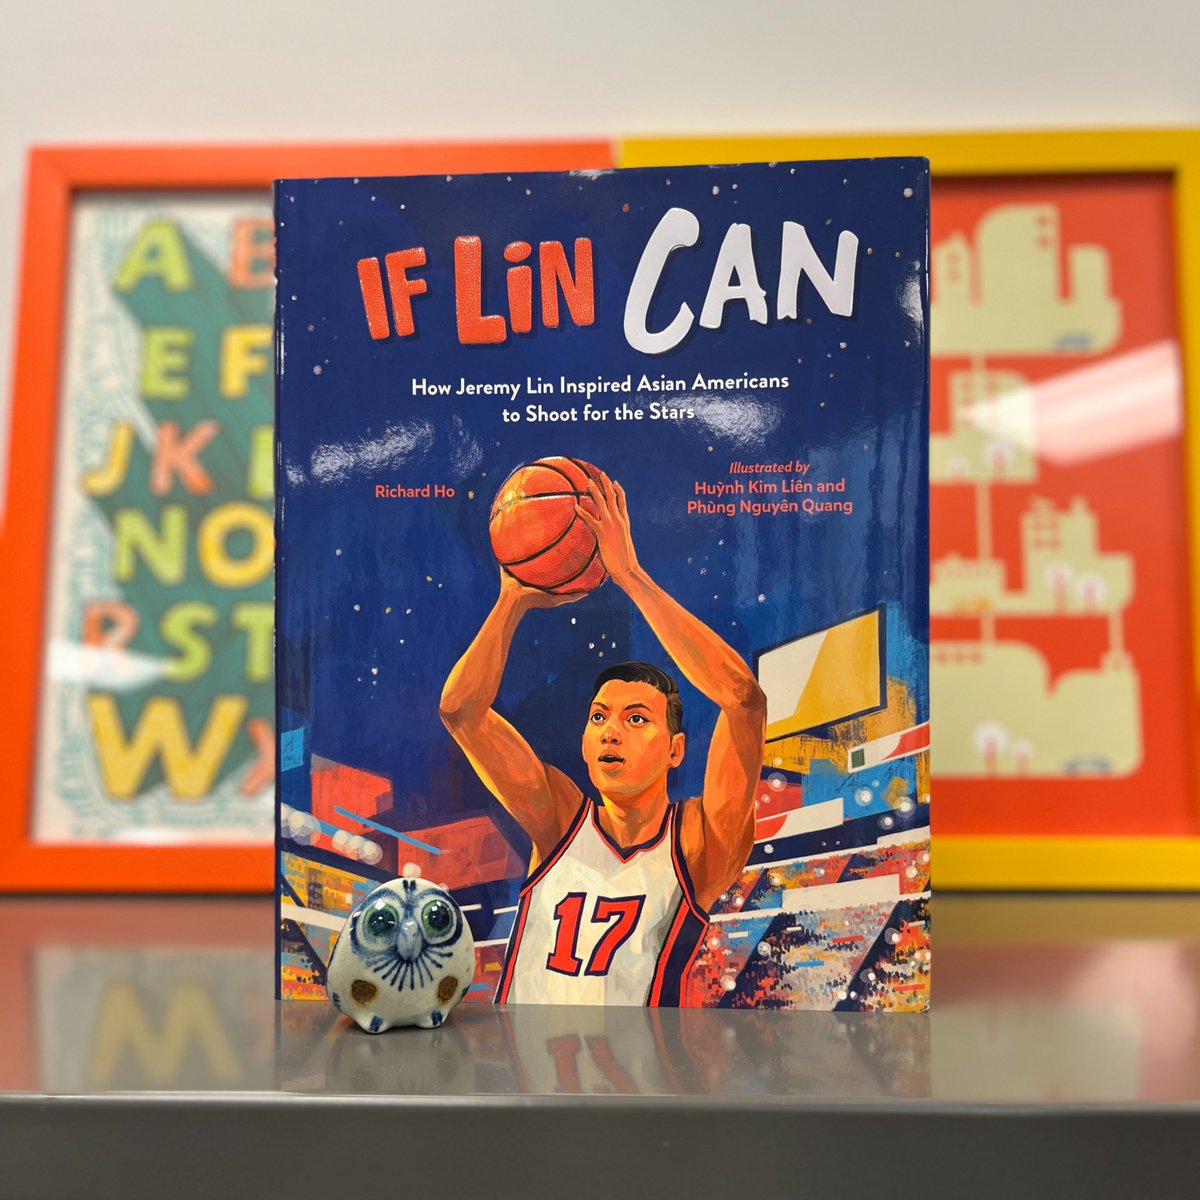 📚🏀 If Lin Can: How Jeremy Lin Inspired Asian Americans to Shoot for the Stars by Richard Ho and illustrated by Huynh Kim Liên and Phùng Nguyên Quang. #dailybutlershelfie #AANHPIHeritageMonth #IfLinCan @richkarho #KAAIllustration